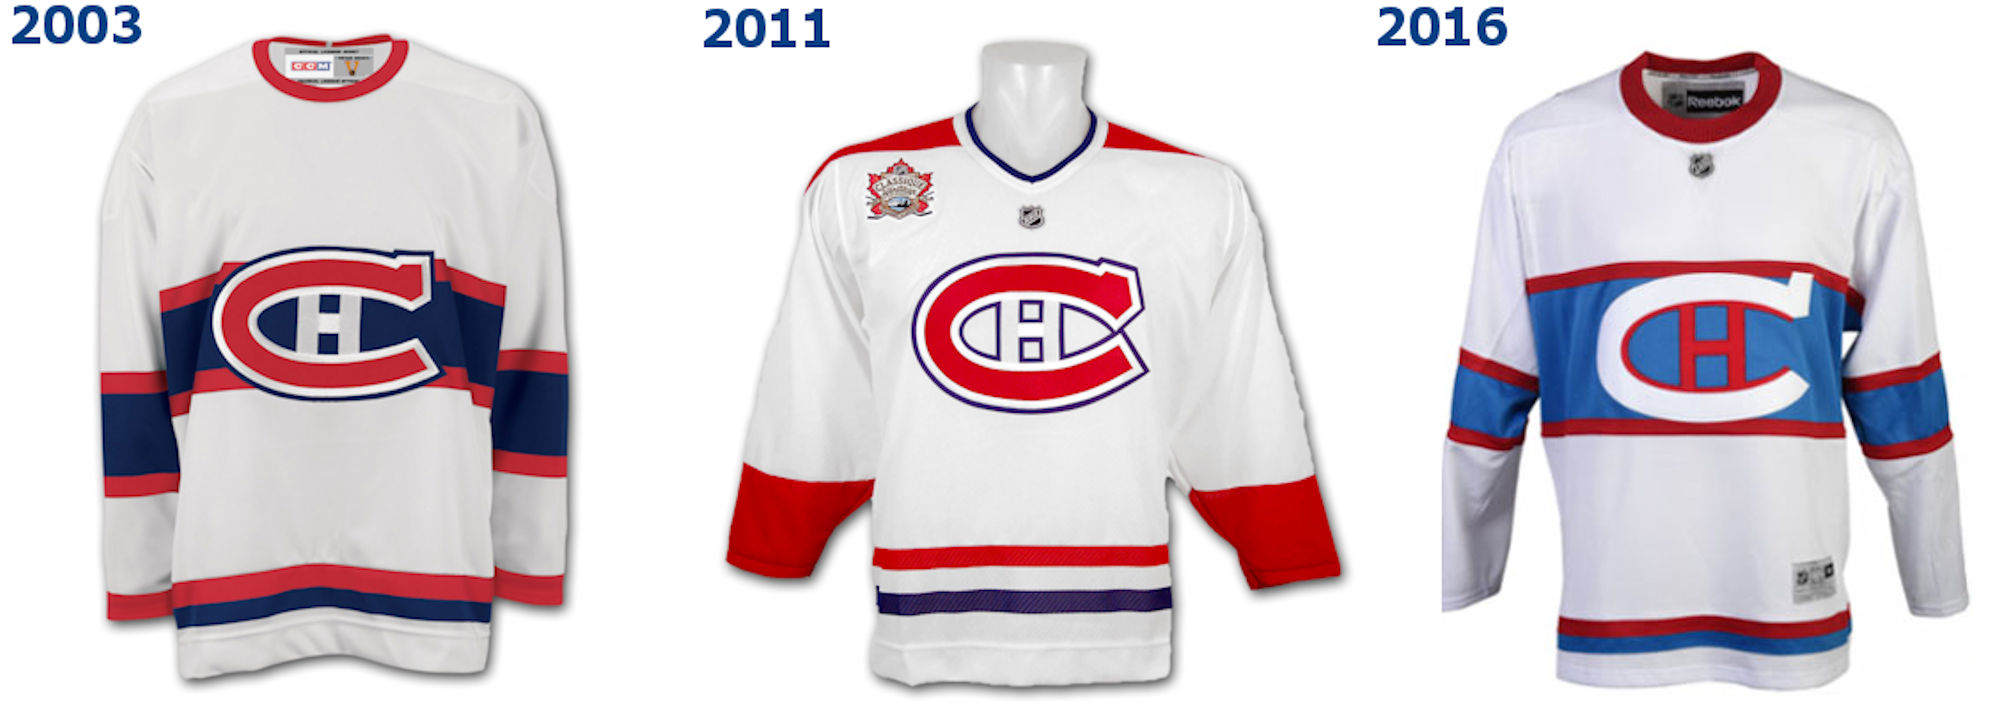 montreal heritage jersey